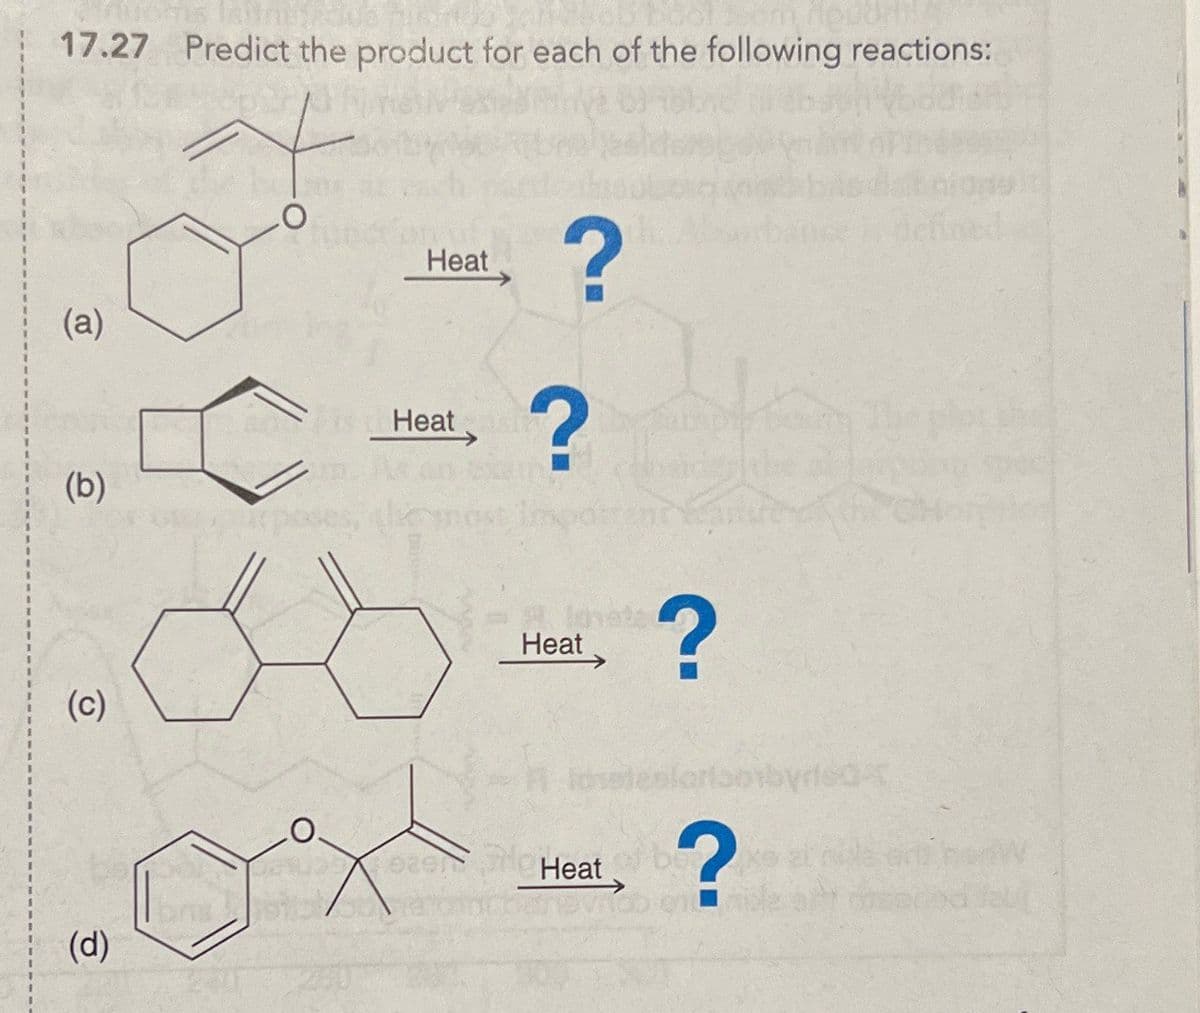 17.27 Predict the product for each of the following reactions:
(a)
(b)
Heat
Heat
?
?
?
(c)
lonete
Heat
?
loosbyris
(d)
?
Heat be
ent